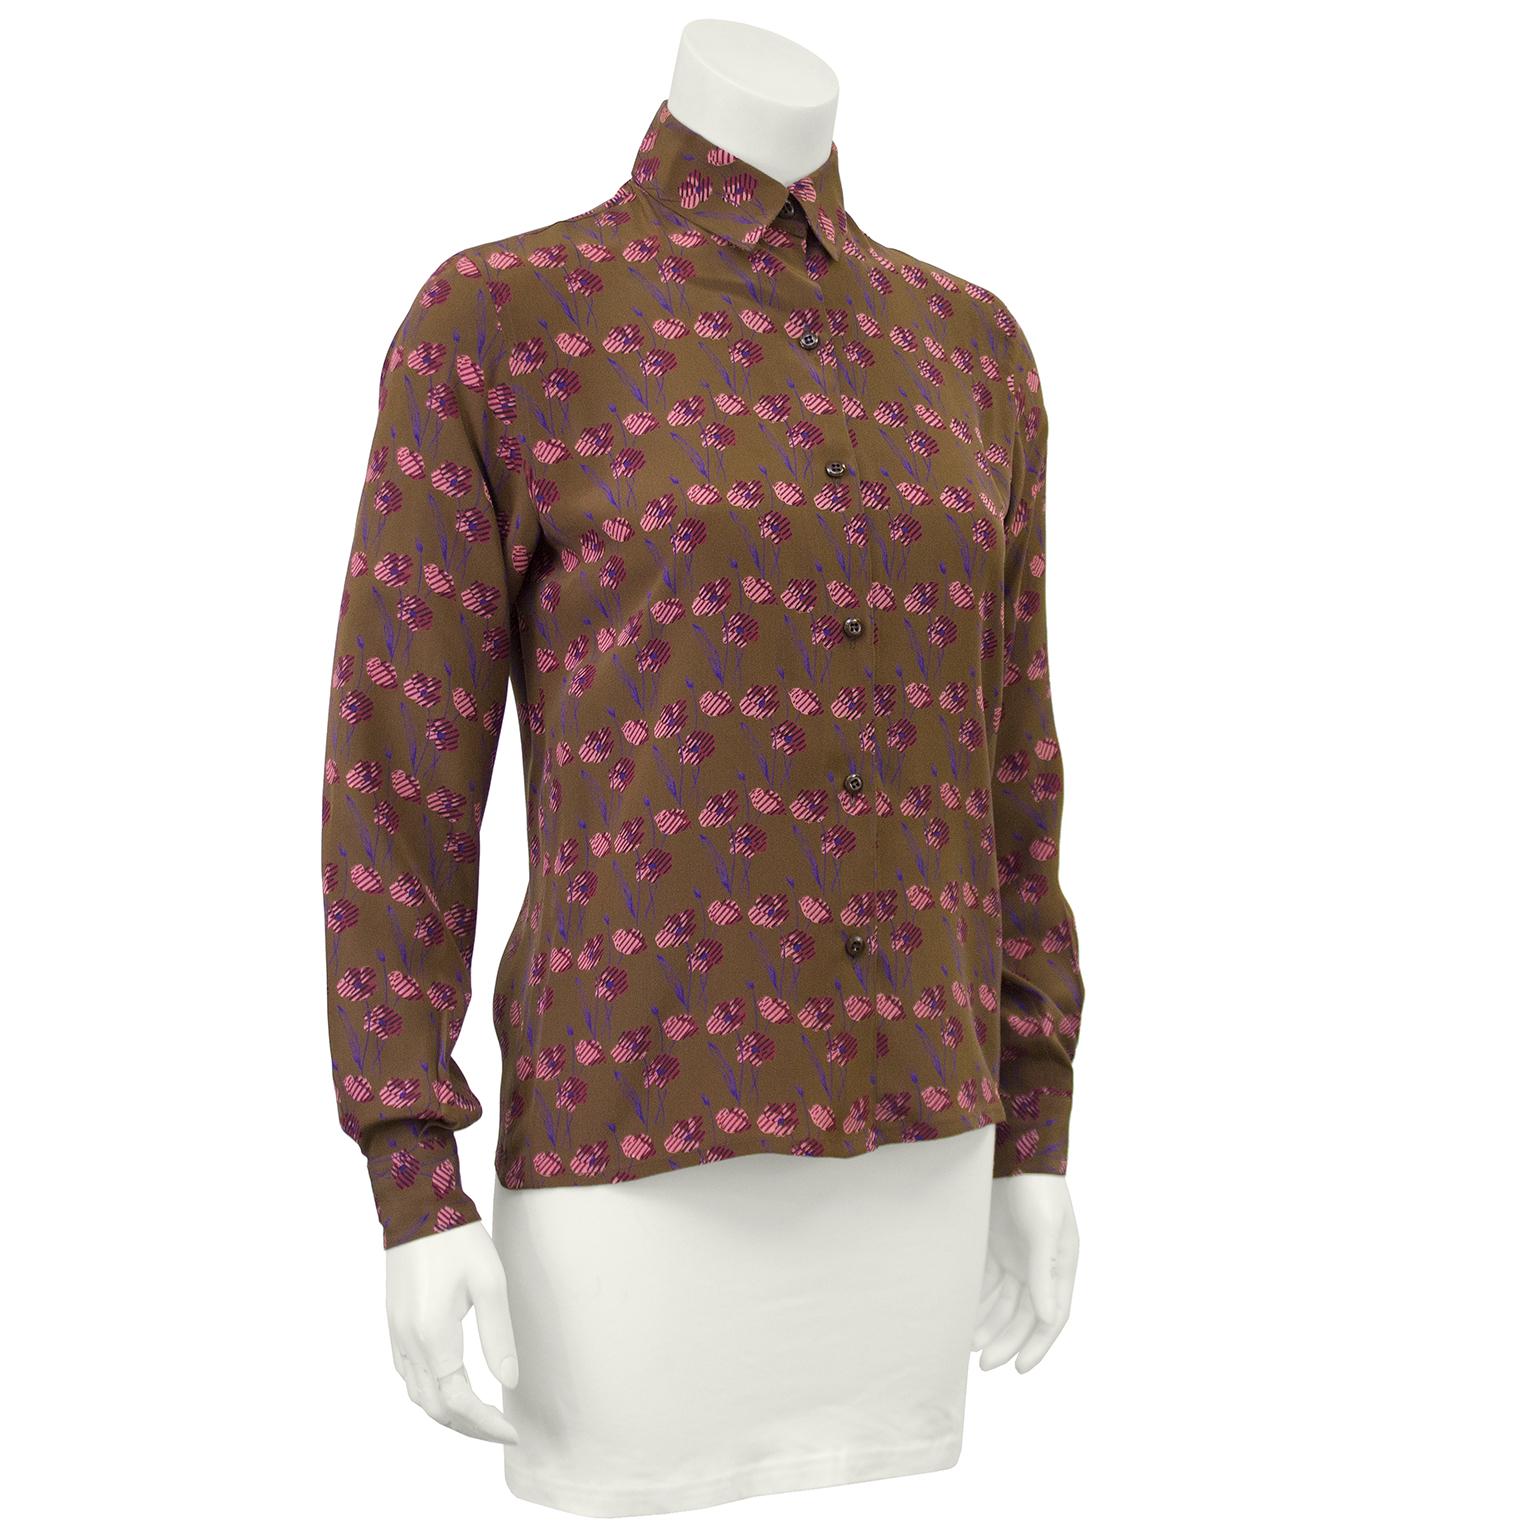 Ferragamo brown floral silk blouse from the 1980s. Blouse features and all over print of abstract pink and purple flowers. The blouse fastens up the front with brown plastic buttons. Button cuffs, free of any stains or holes. Fits a US 0-4. 